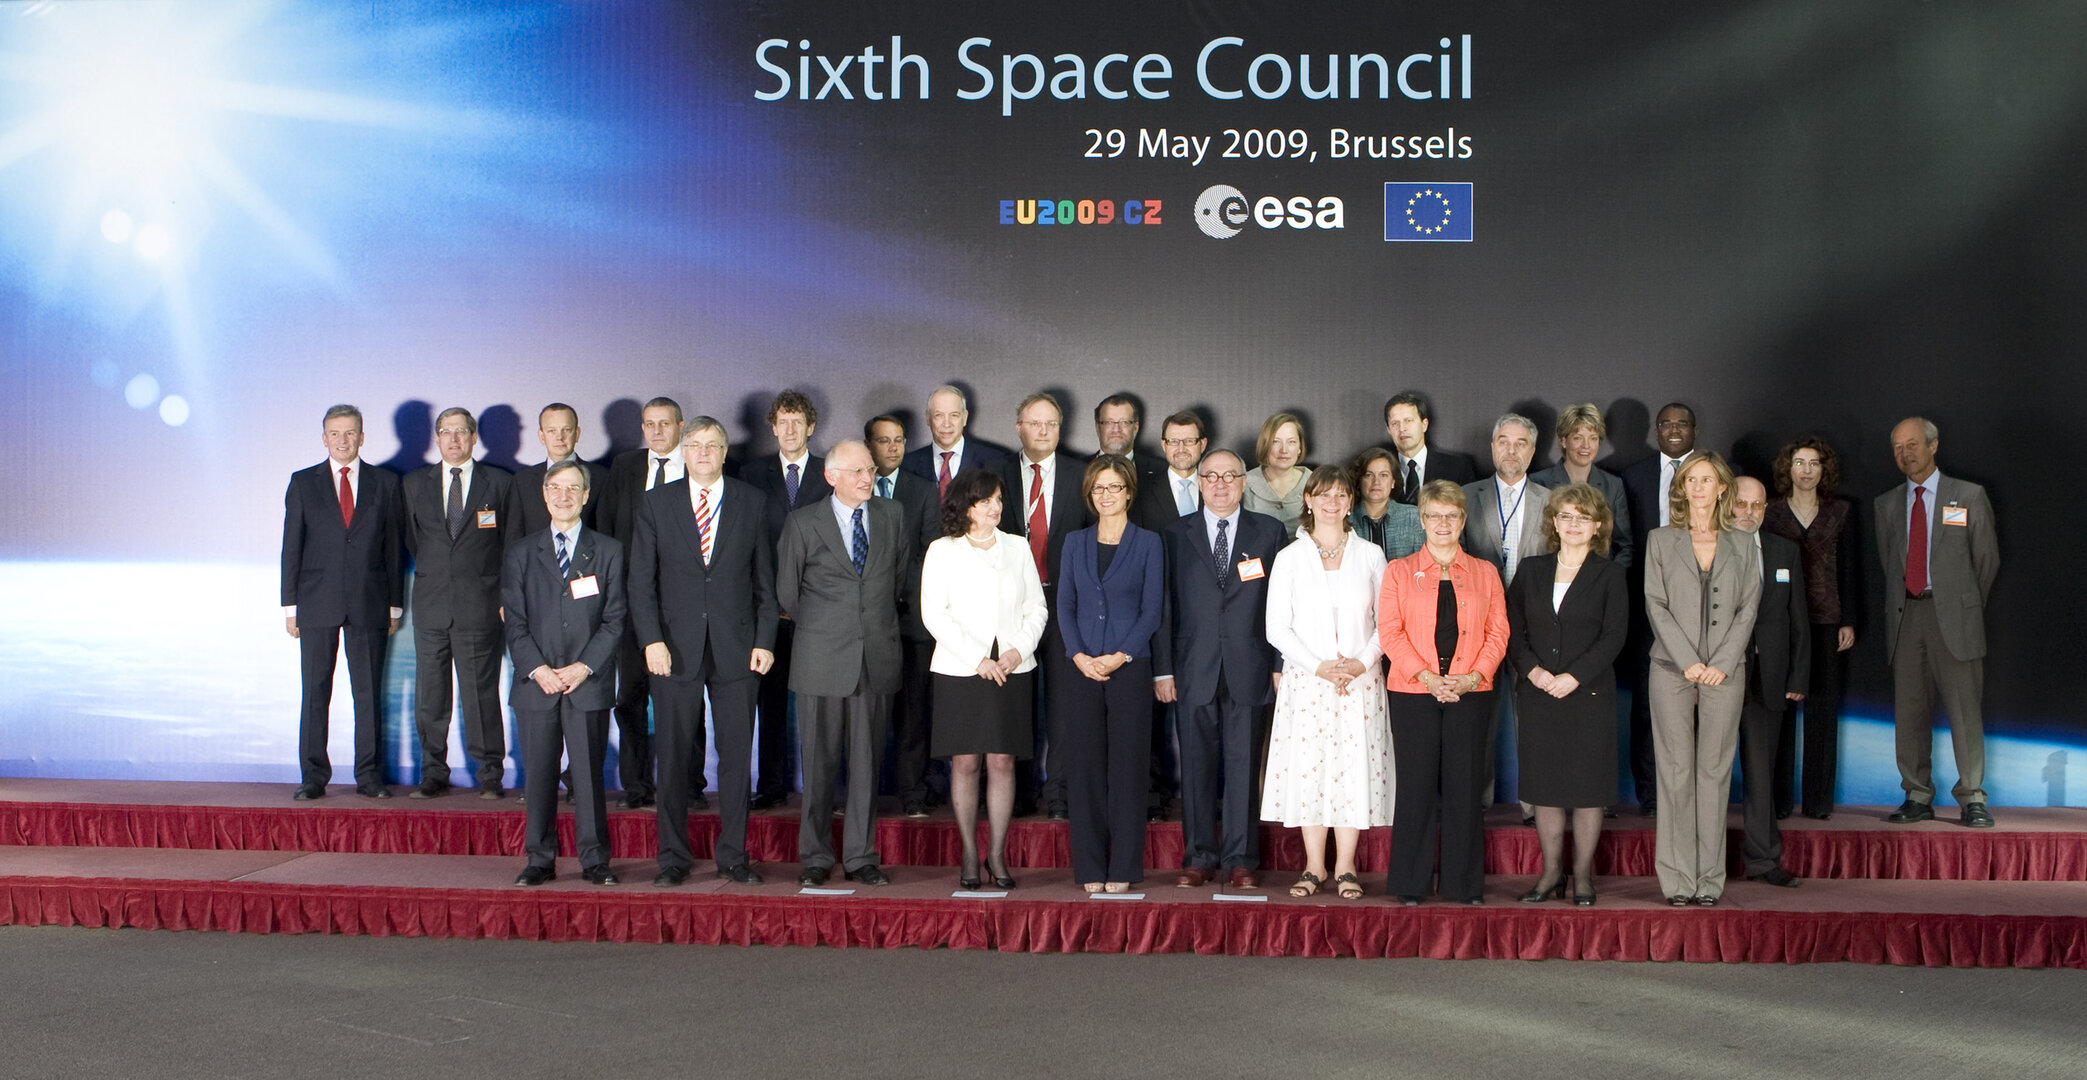 Ministers in charge of space activities met in Brussels for the Sixth Space Council